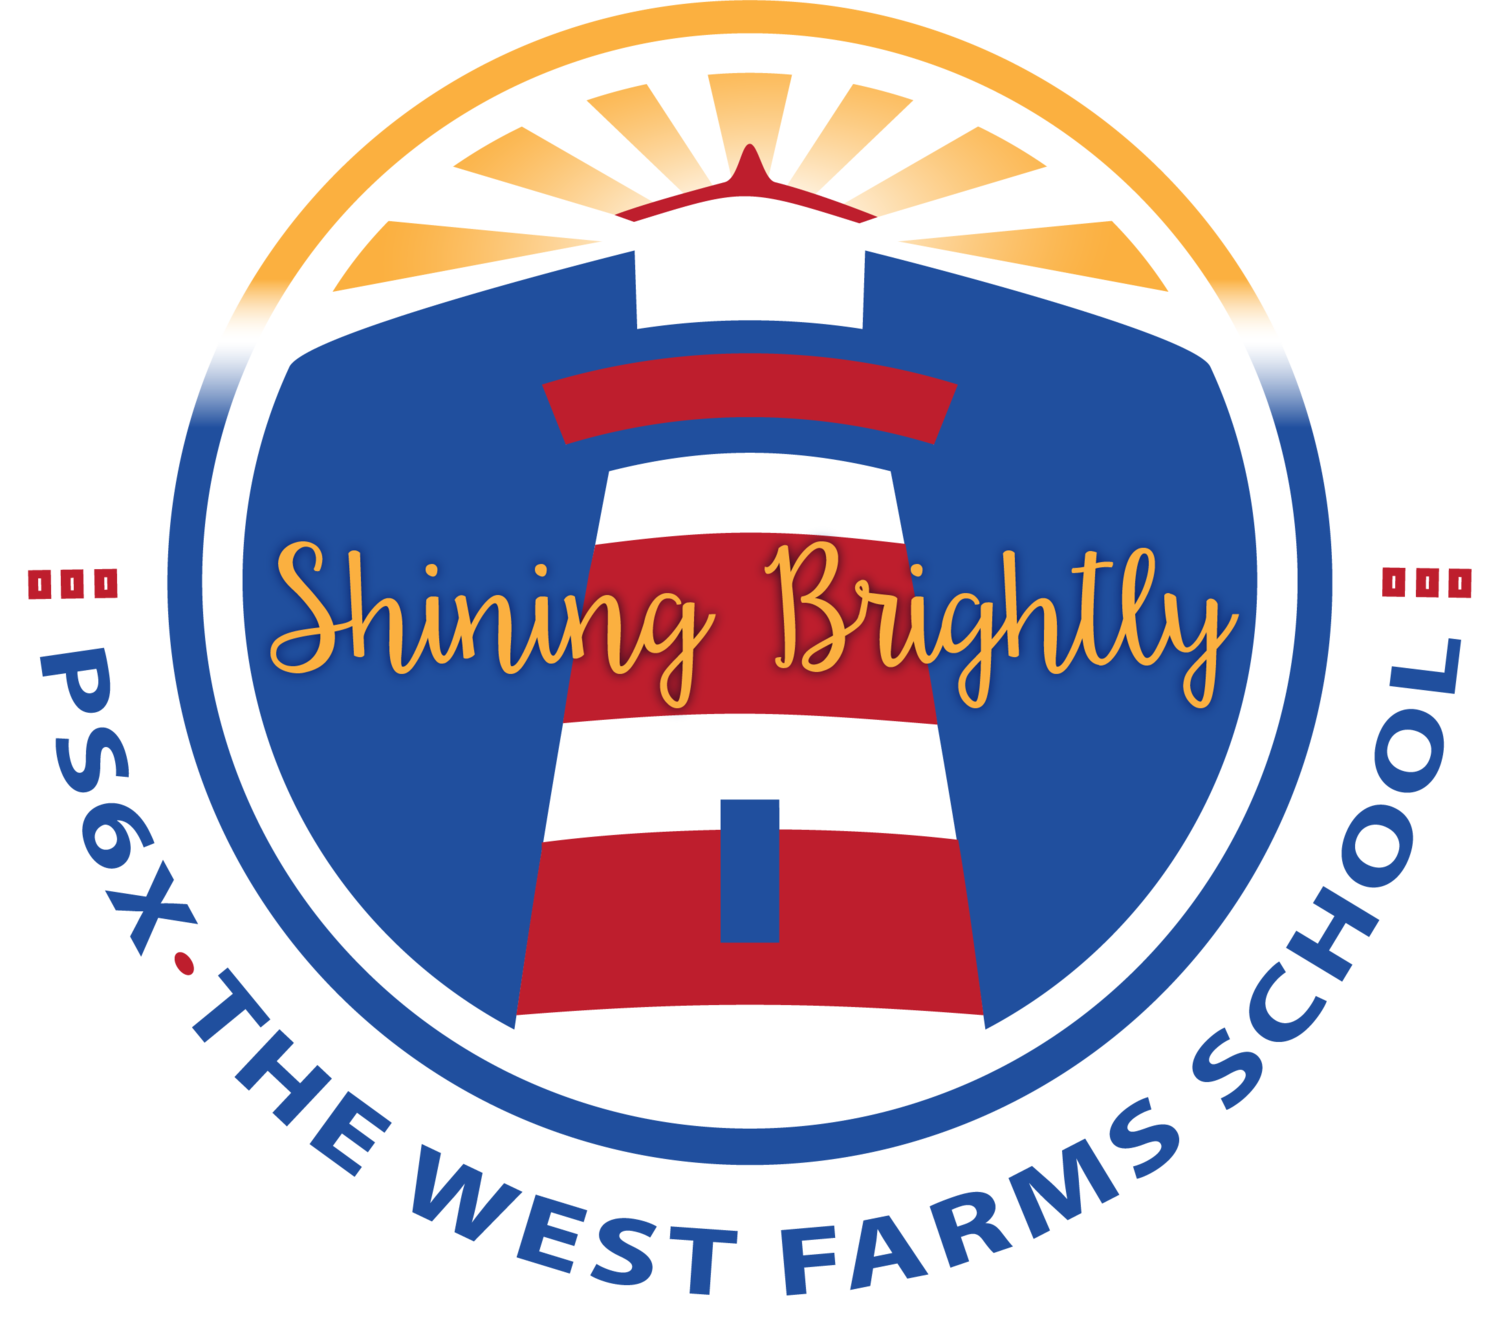 PS 6X ~ The West Farms School